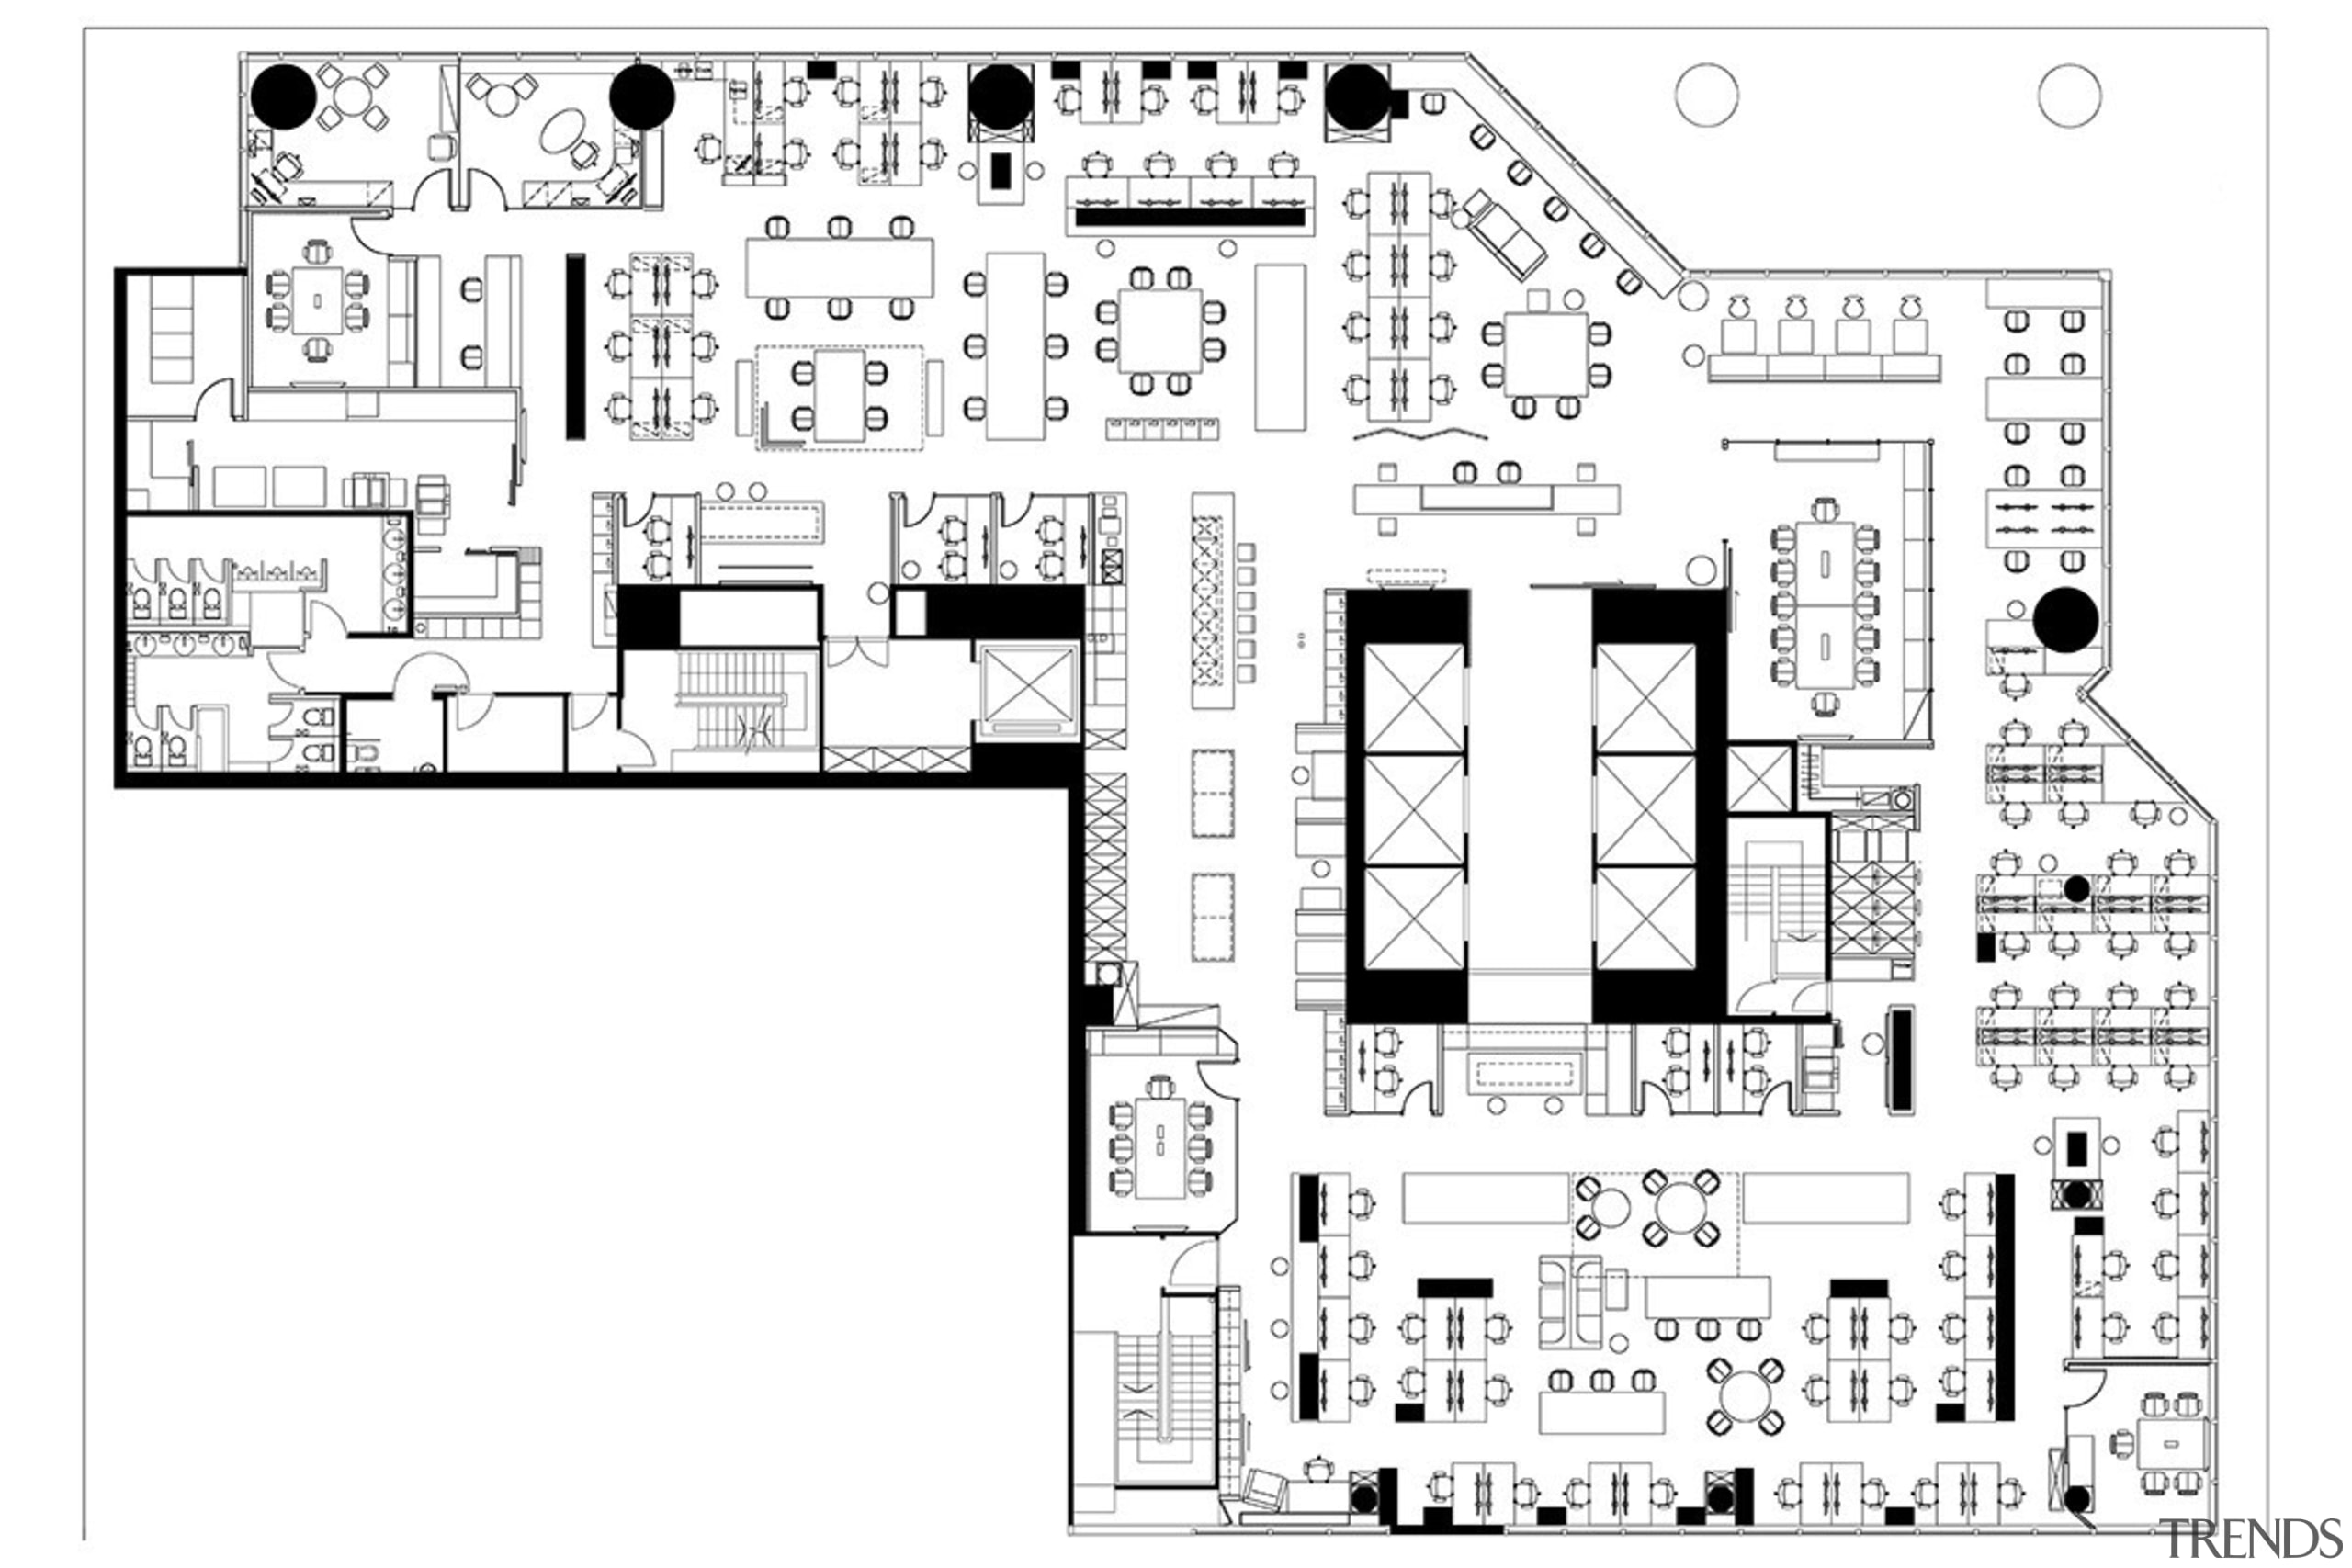 The M Moser Hong Kong floorplan shows a area, black and white, design, diagram, drawing, floor plan, font, line, plan, schematic, technical drawing, text, white